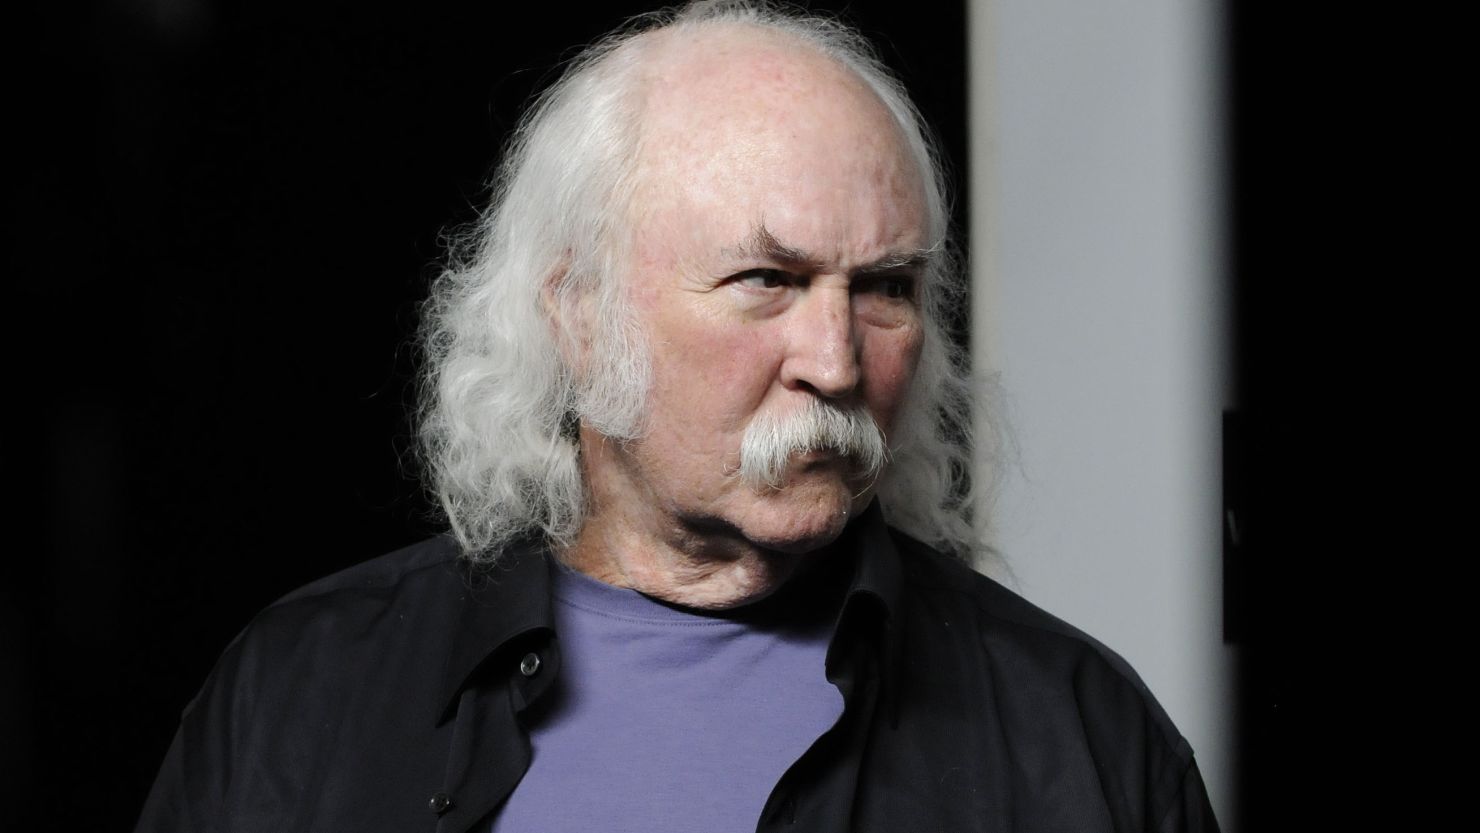 David Crosby is one of the artists who has signed on for "Occupy This Album."